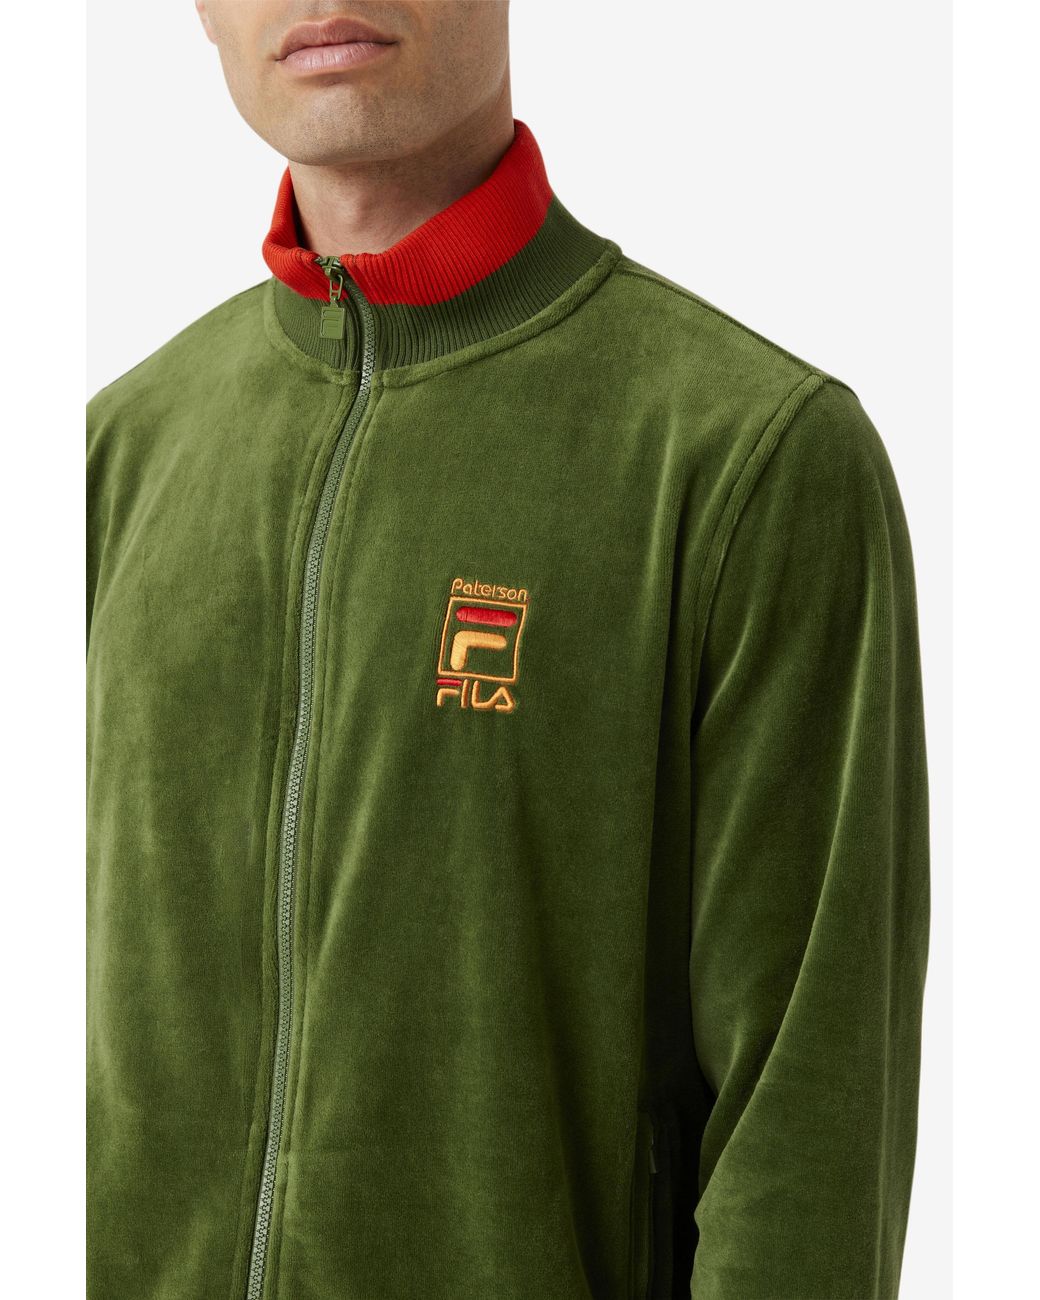 Fila Cotton X Paterson Velour Jacket in Green for Men - Lyst